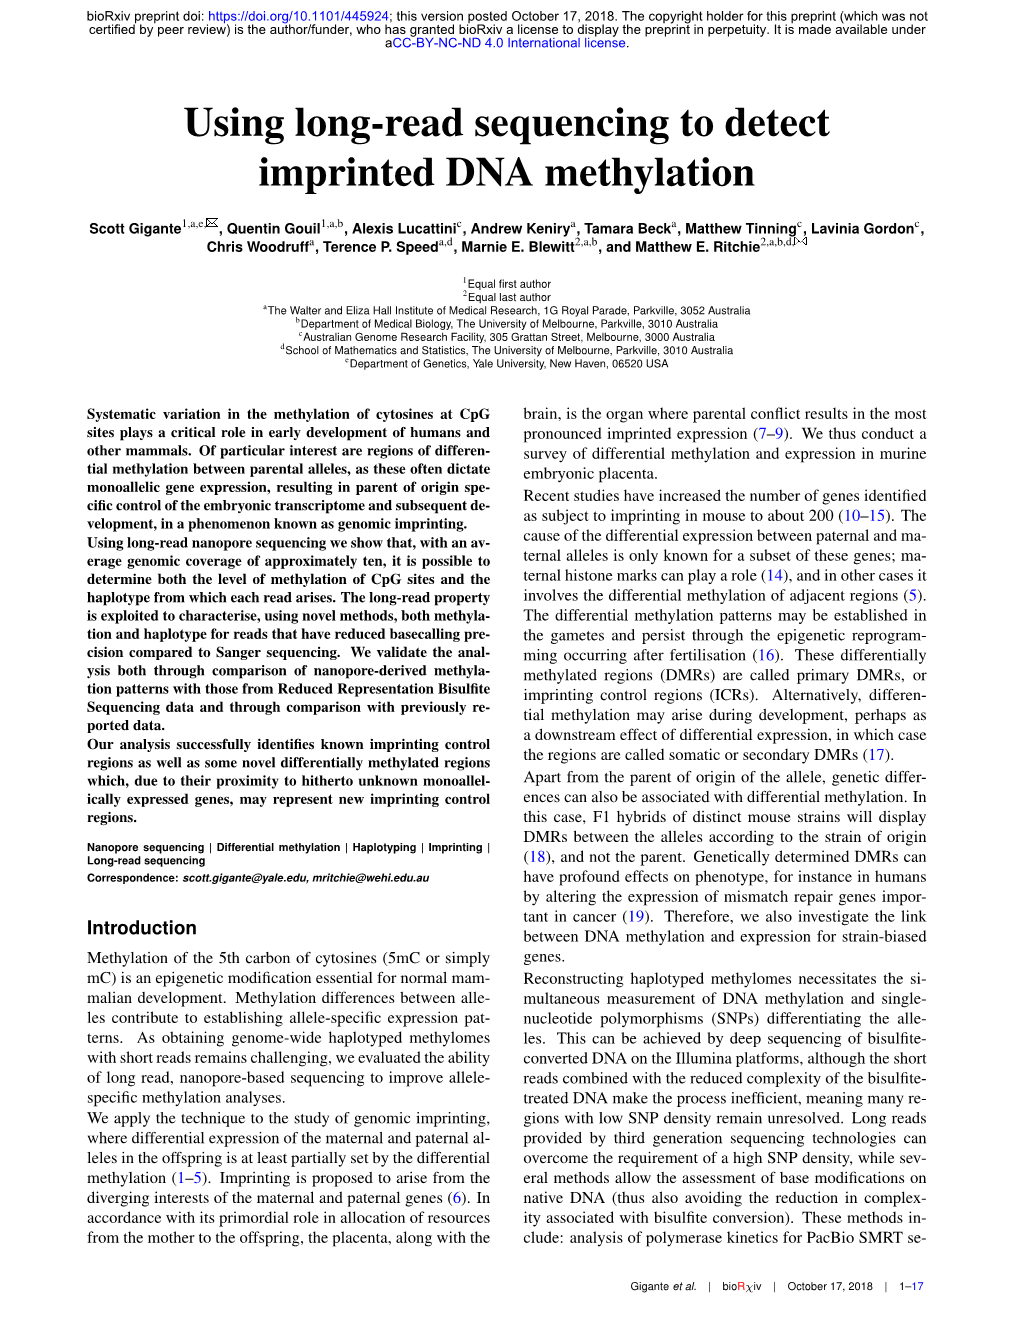 Using Long-Read Sequencing to Detect Imprinted DNA Methylation